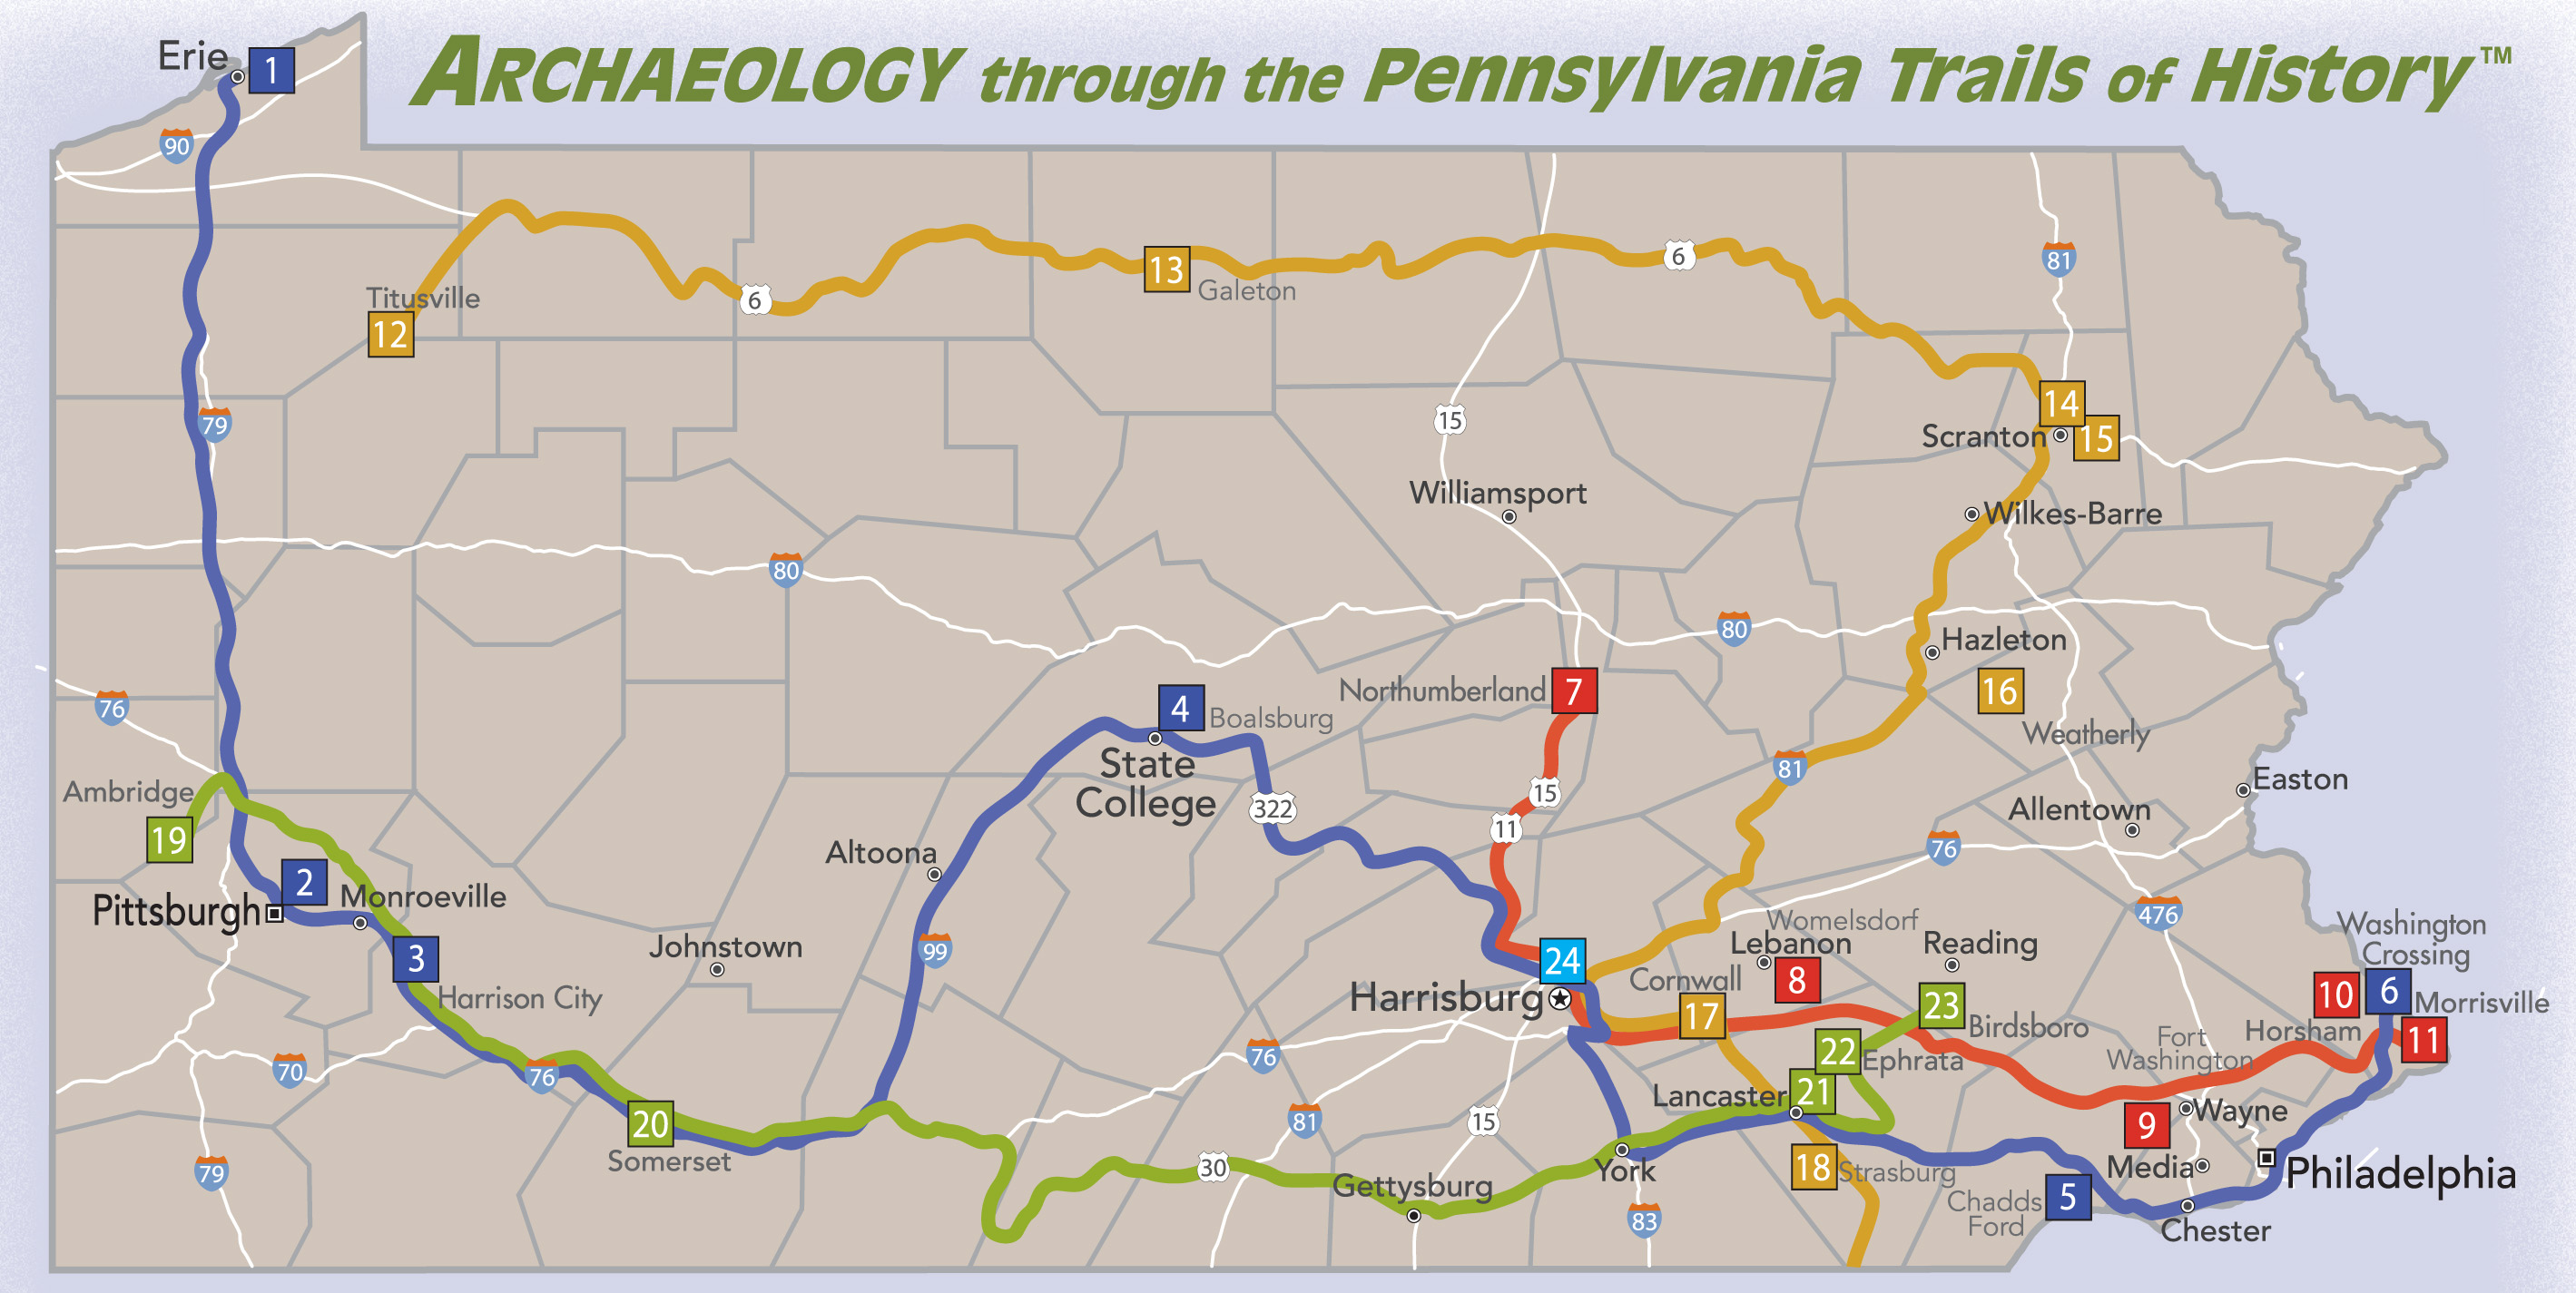 Archaeology through the Pennsylvania Trails of History